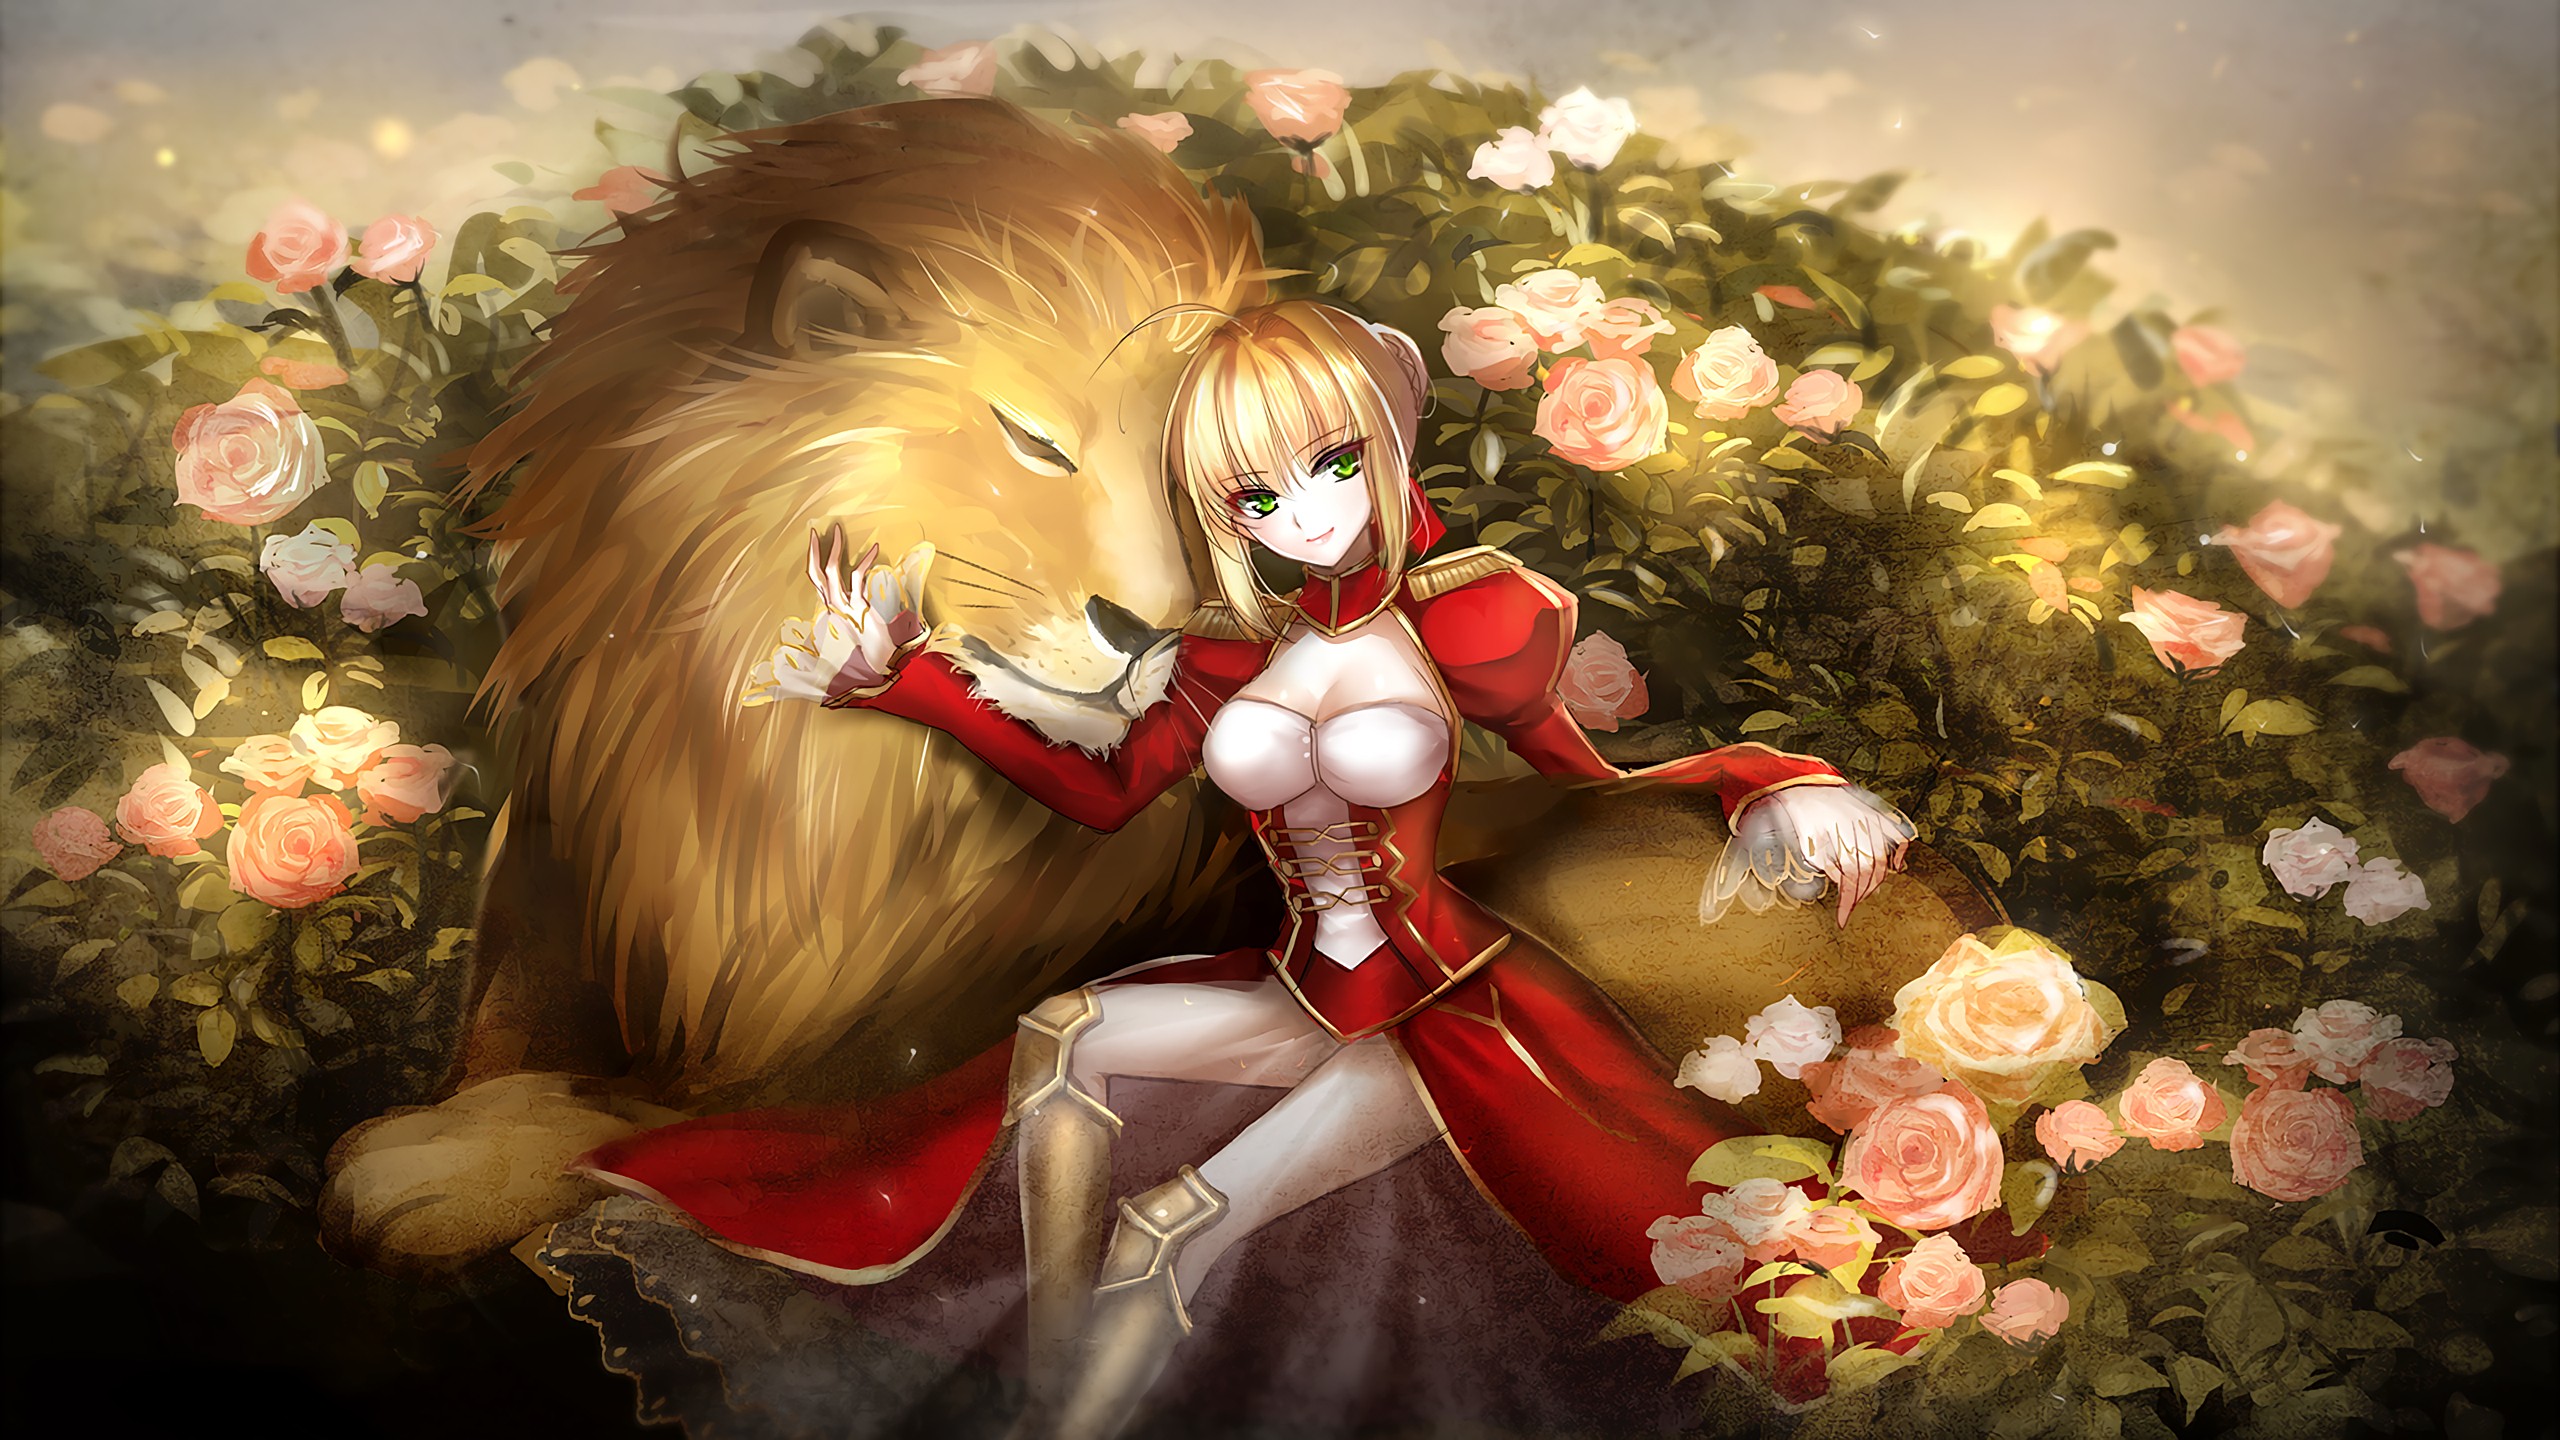 Anime 2560x1440 anime anime girls video games Fate/Grand Order lion animals mammals big cats looking at viewer Nero Claudius Fate series